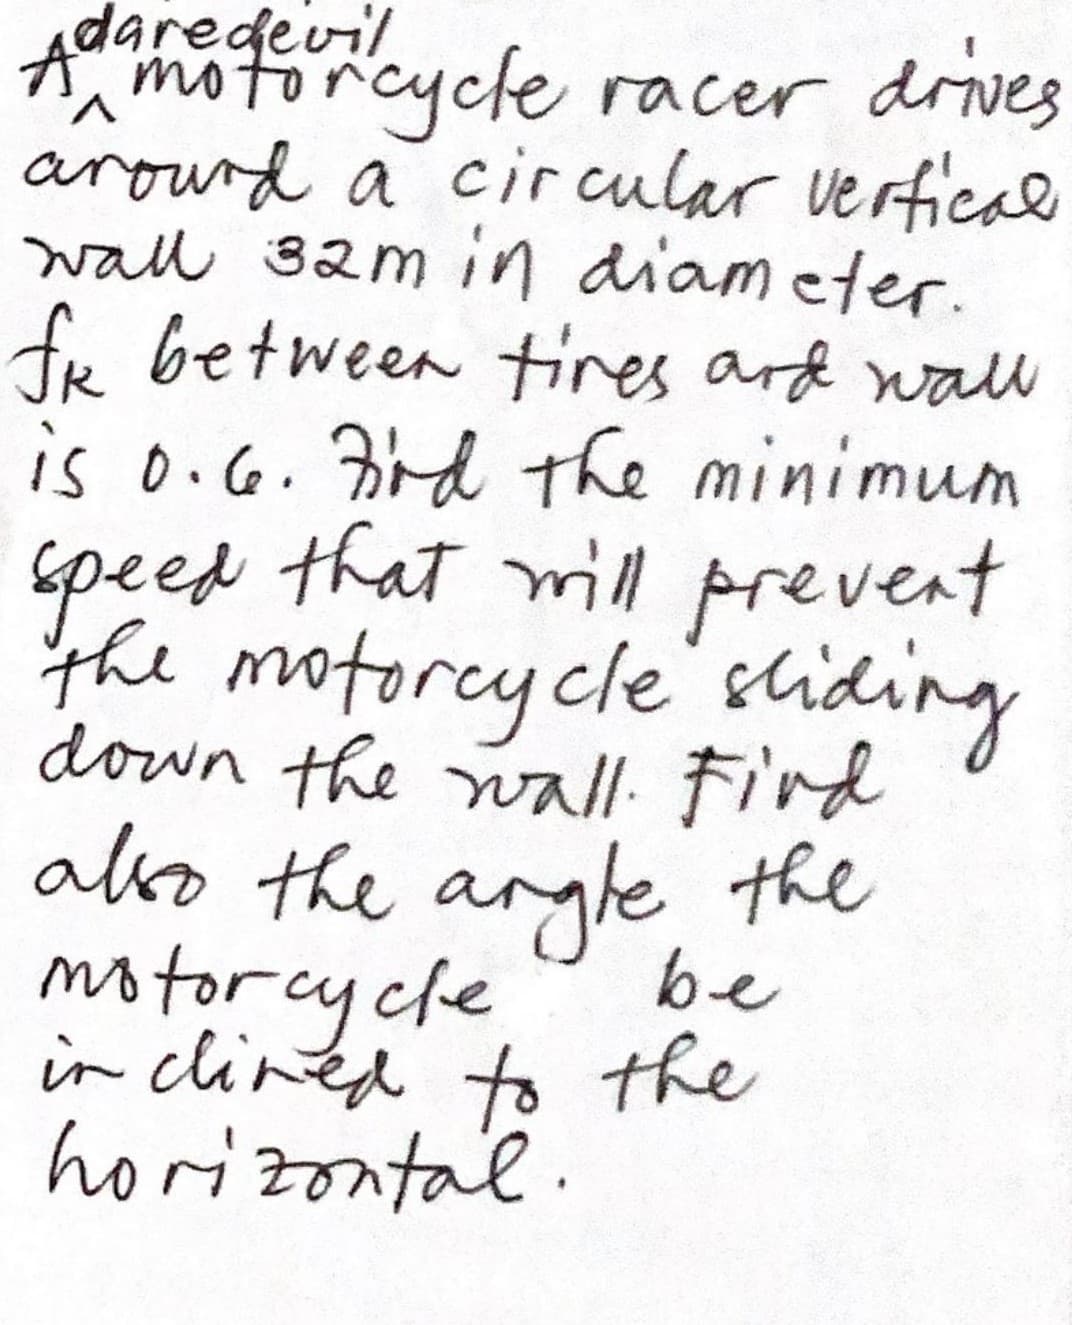 Adar
edevil
motorcycle racer drives
V.
arourd a cir cular vertical
wall 32m in diam eter.
fr between tres ard wall
is o.G. rd the minimum
speed that ill prevent
the motorcycle'sliding
down the wall: Fird
ako the argle the
motorcycle
in clined to the
horizontal.
be
